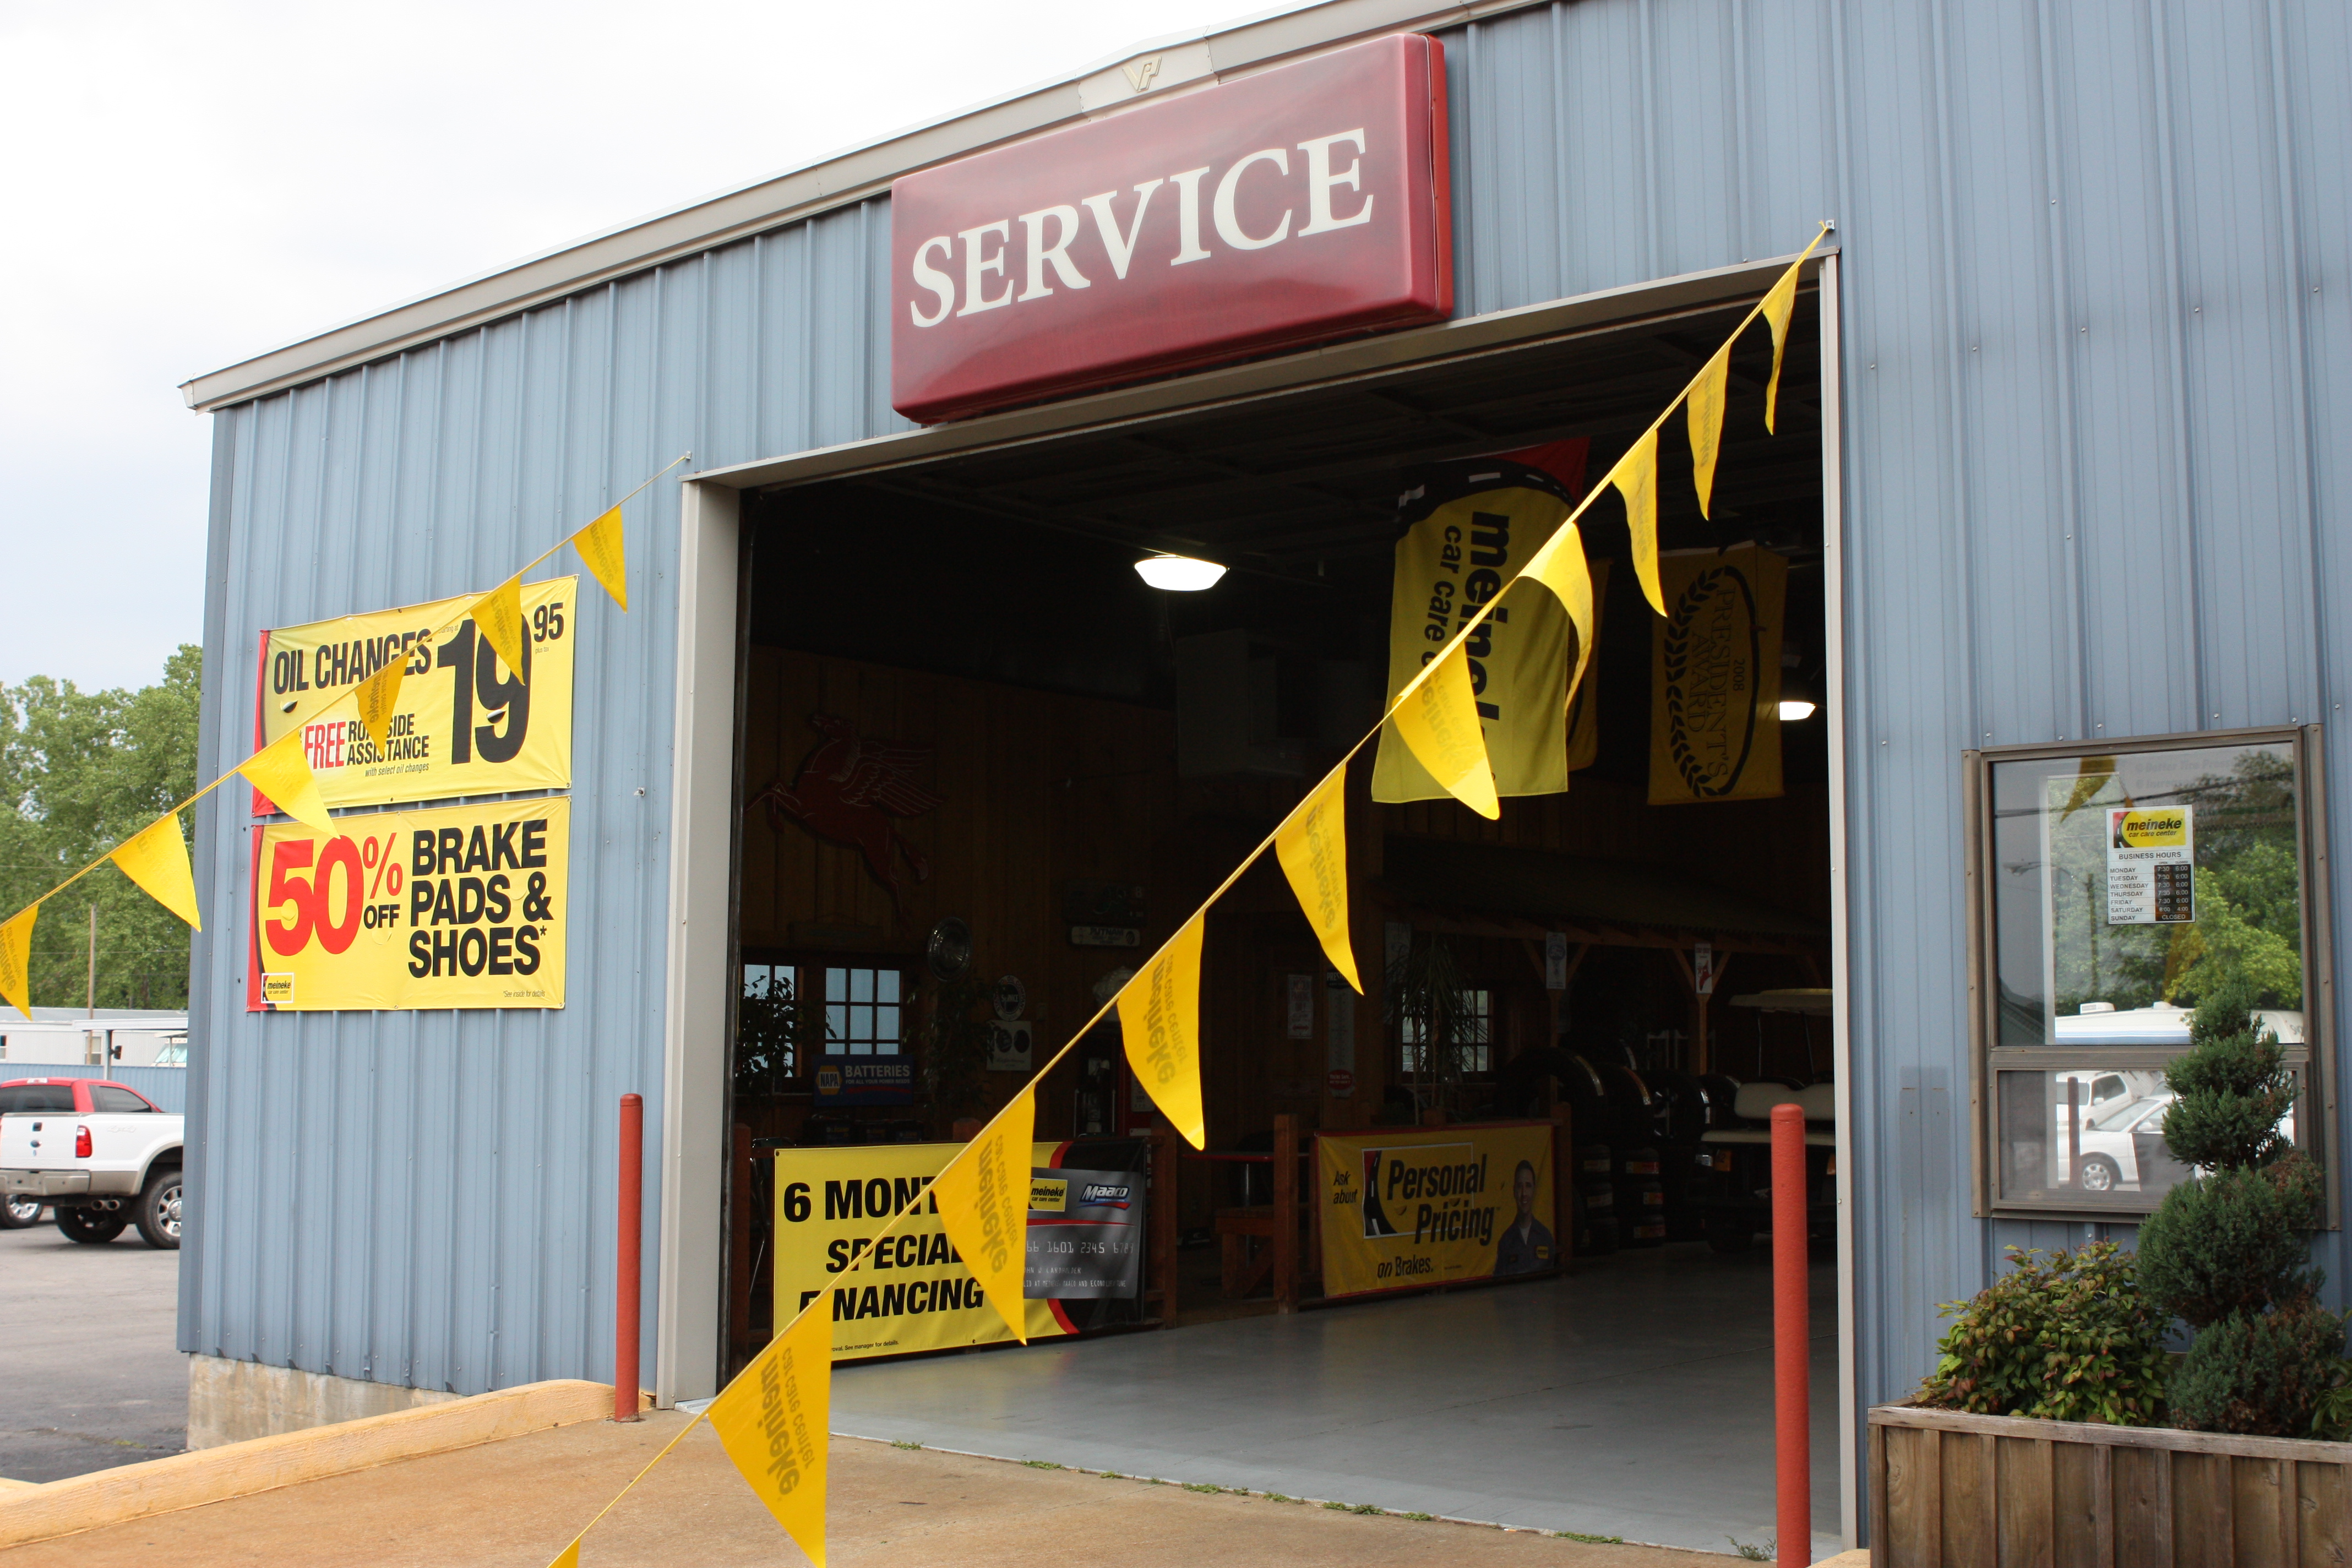 Don't Forget About Our meineke Service Station